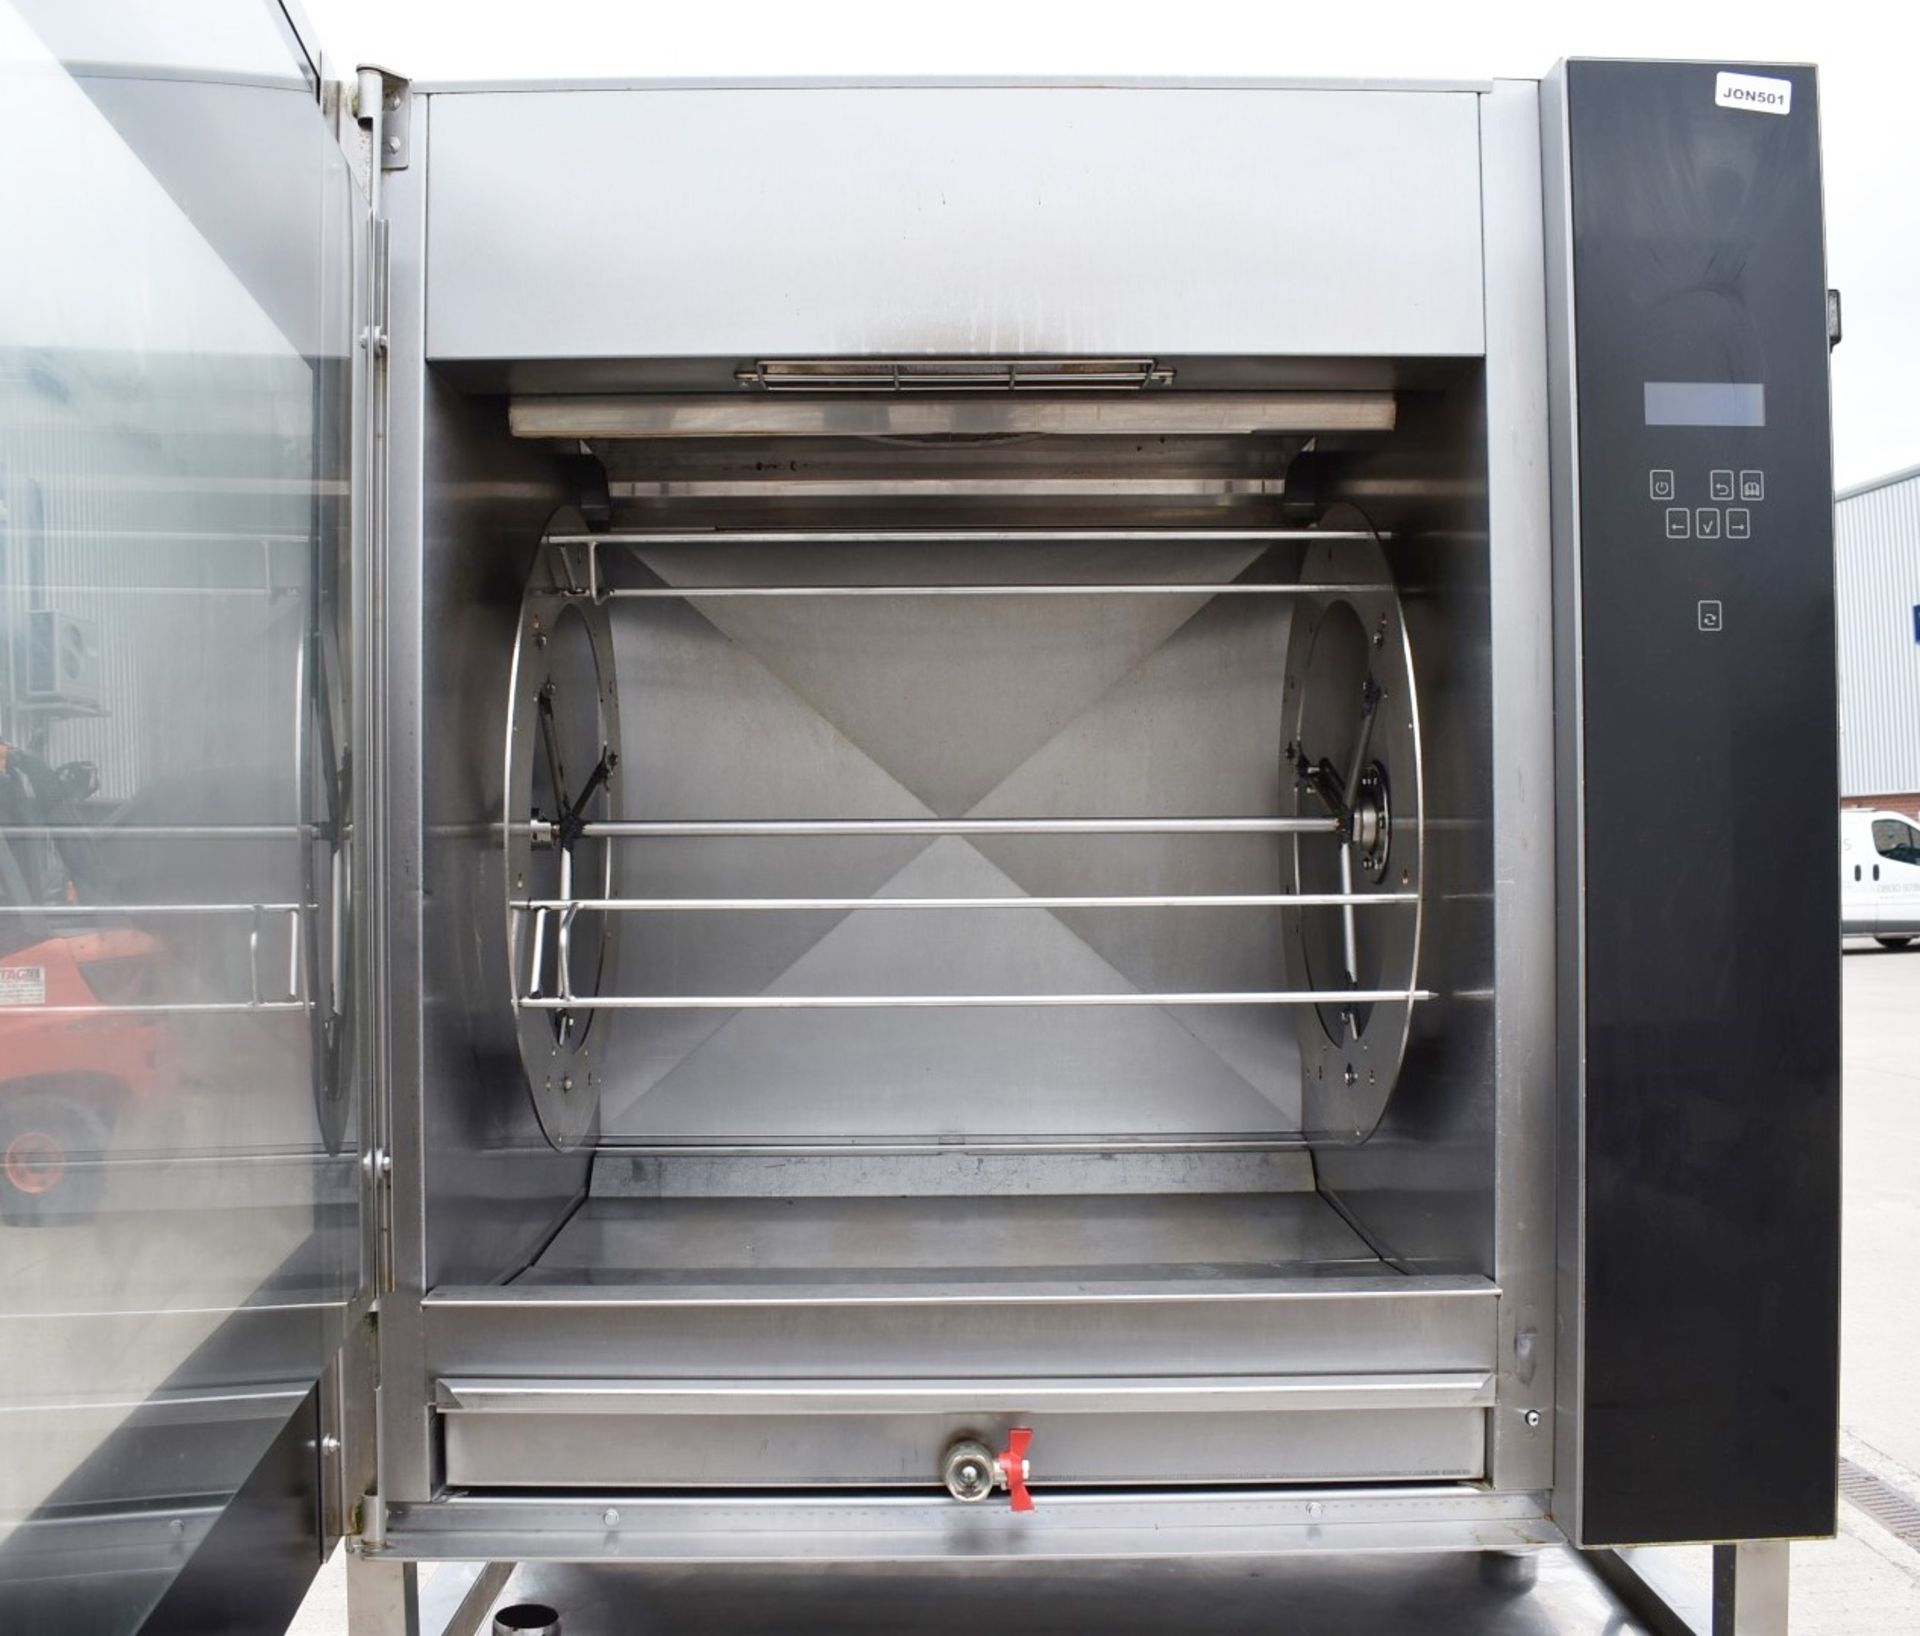 1 x Houno Electric Combi Oven and Fri-jado Rotisserie Oven Combo With Stand - 3 Phase - Image 11 of 22